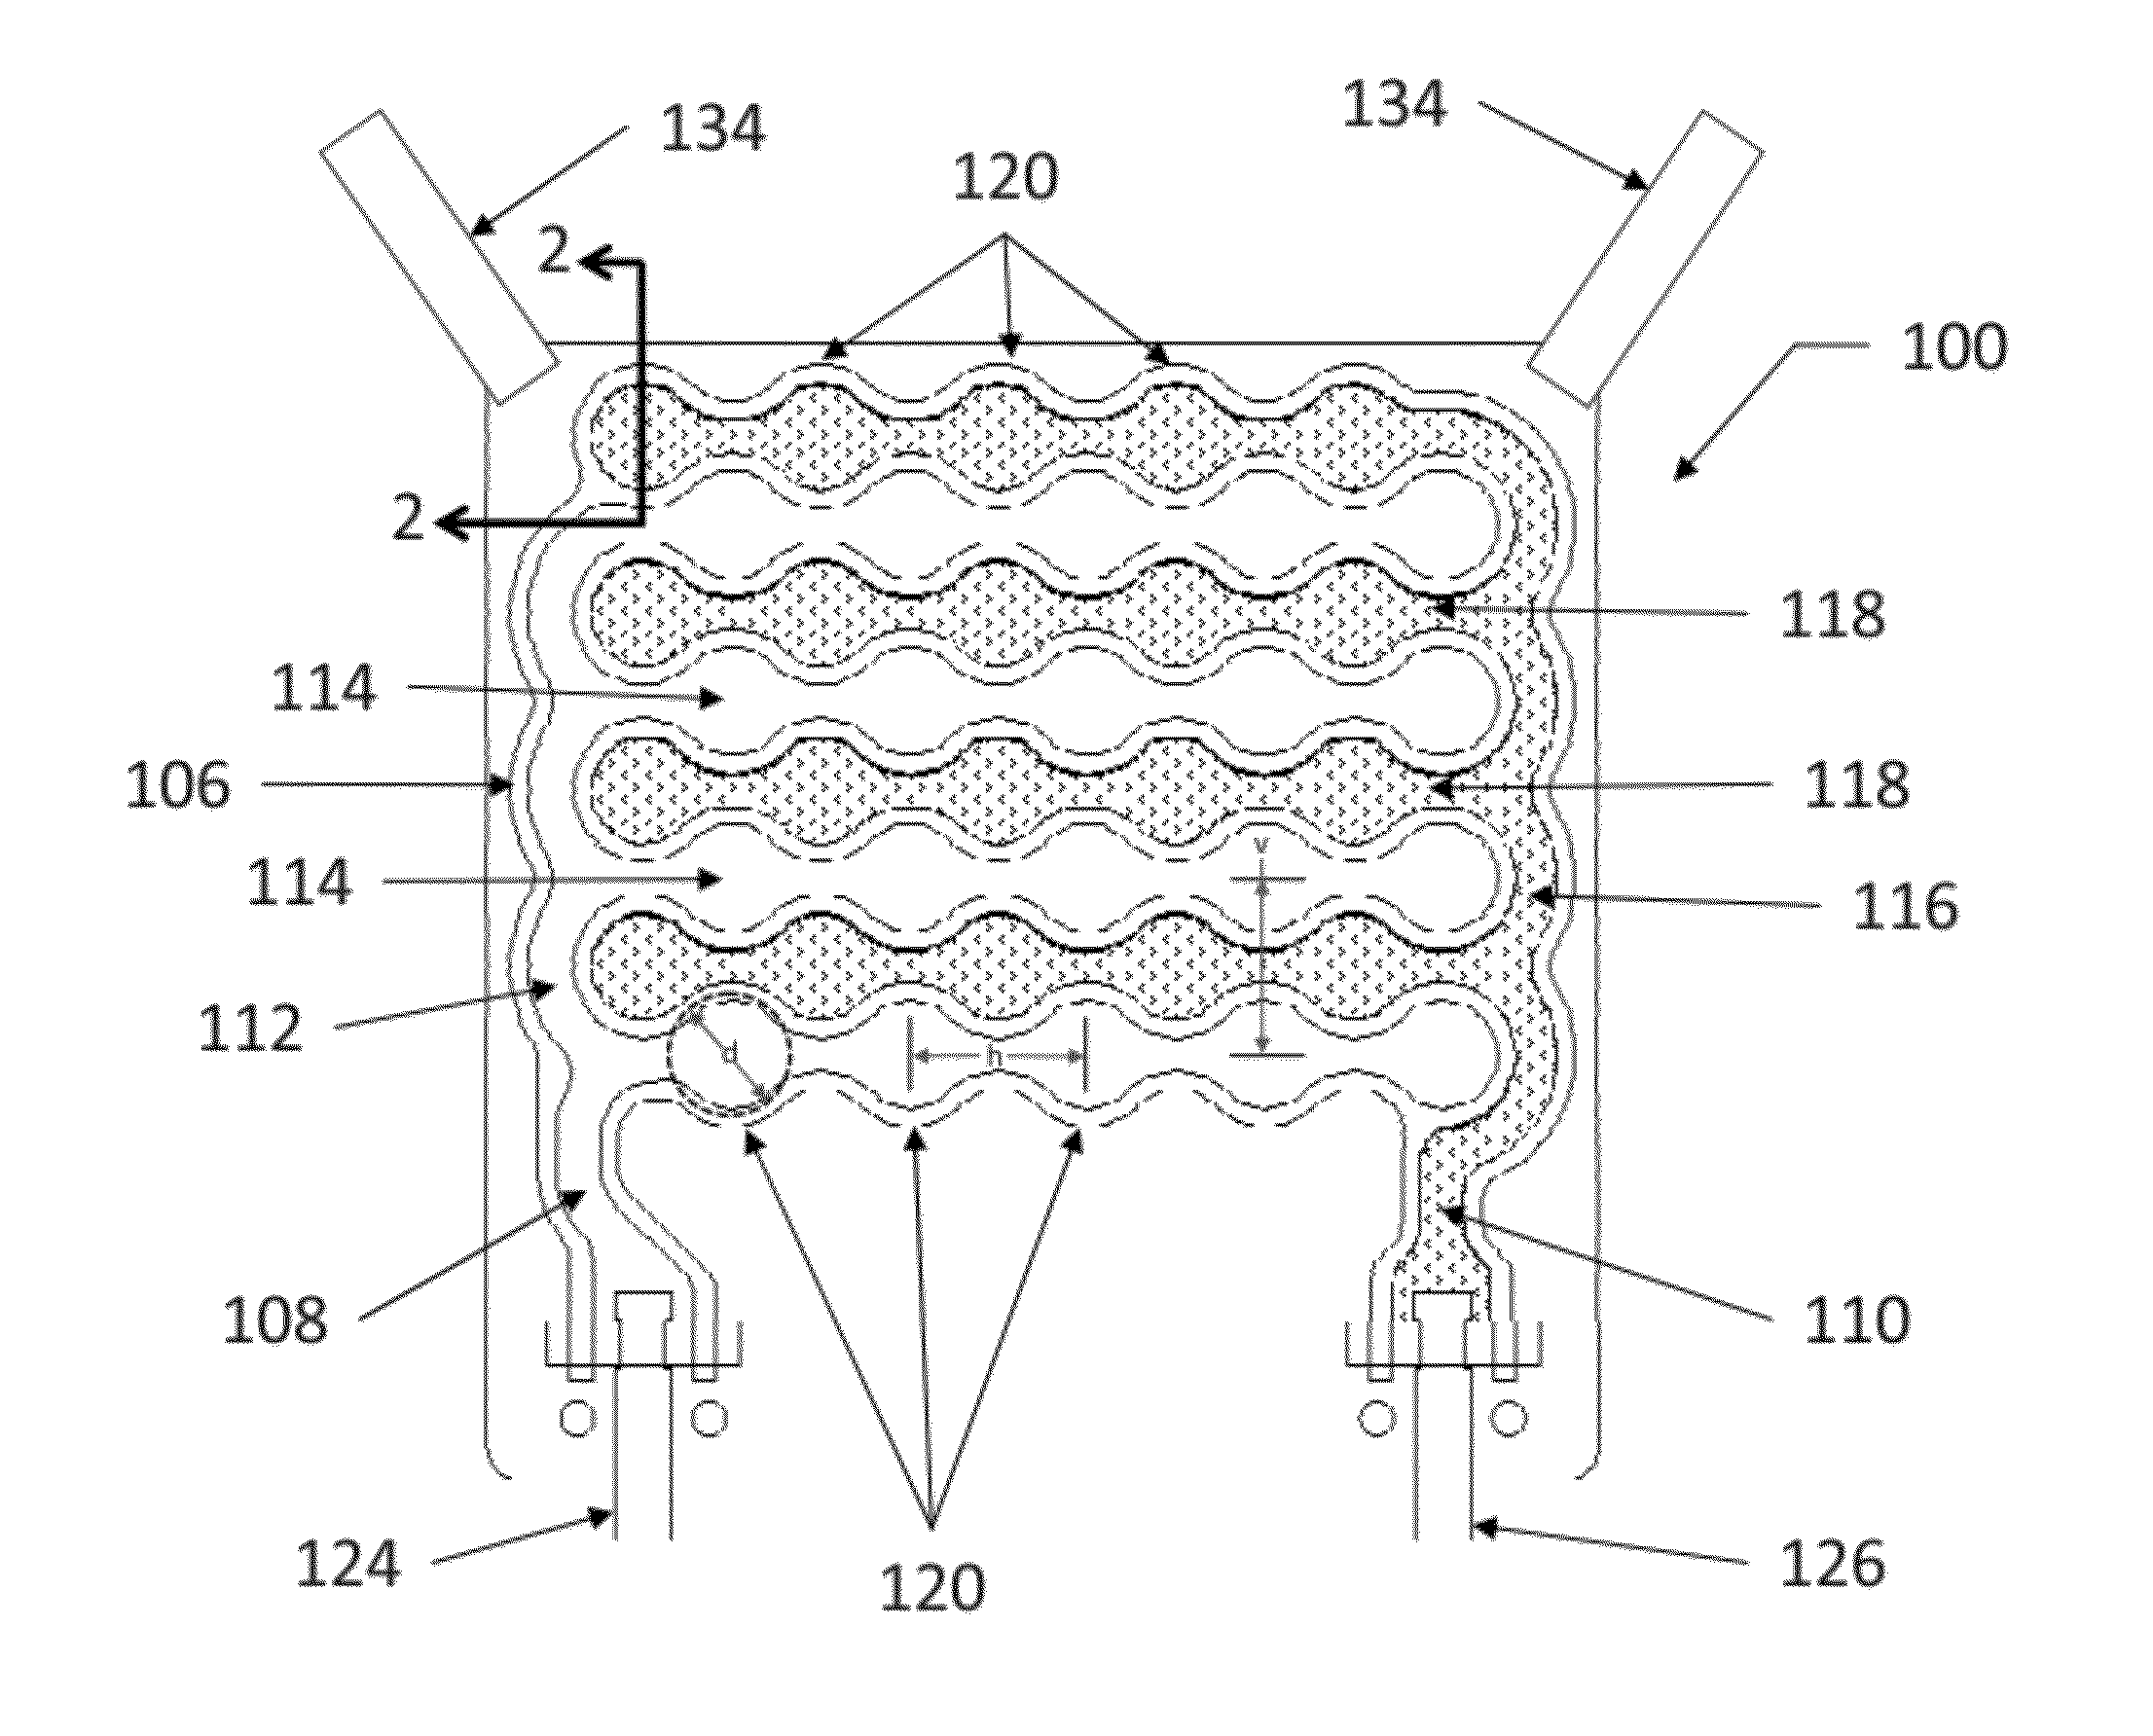 Support apparatus, system and method